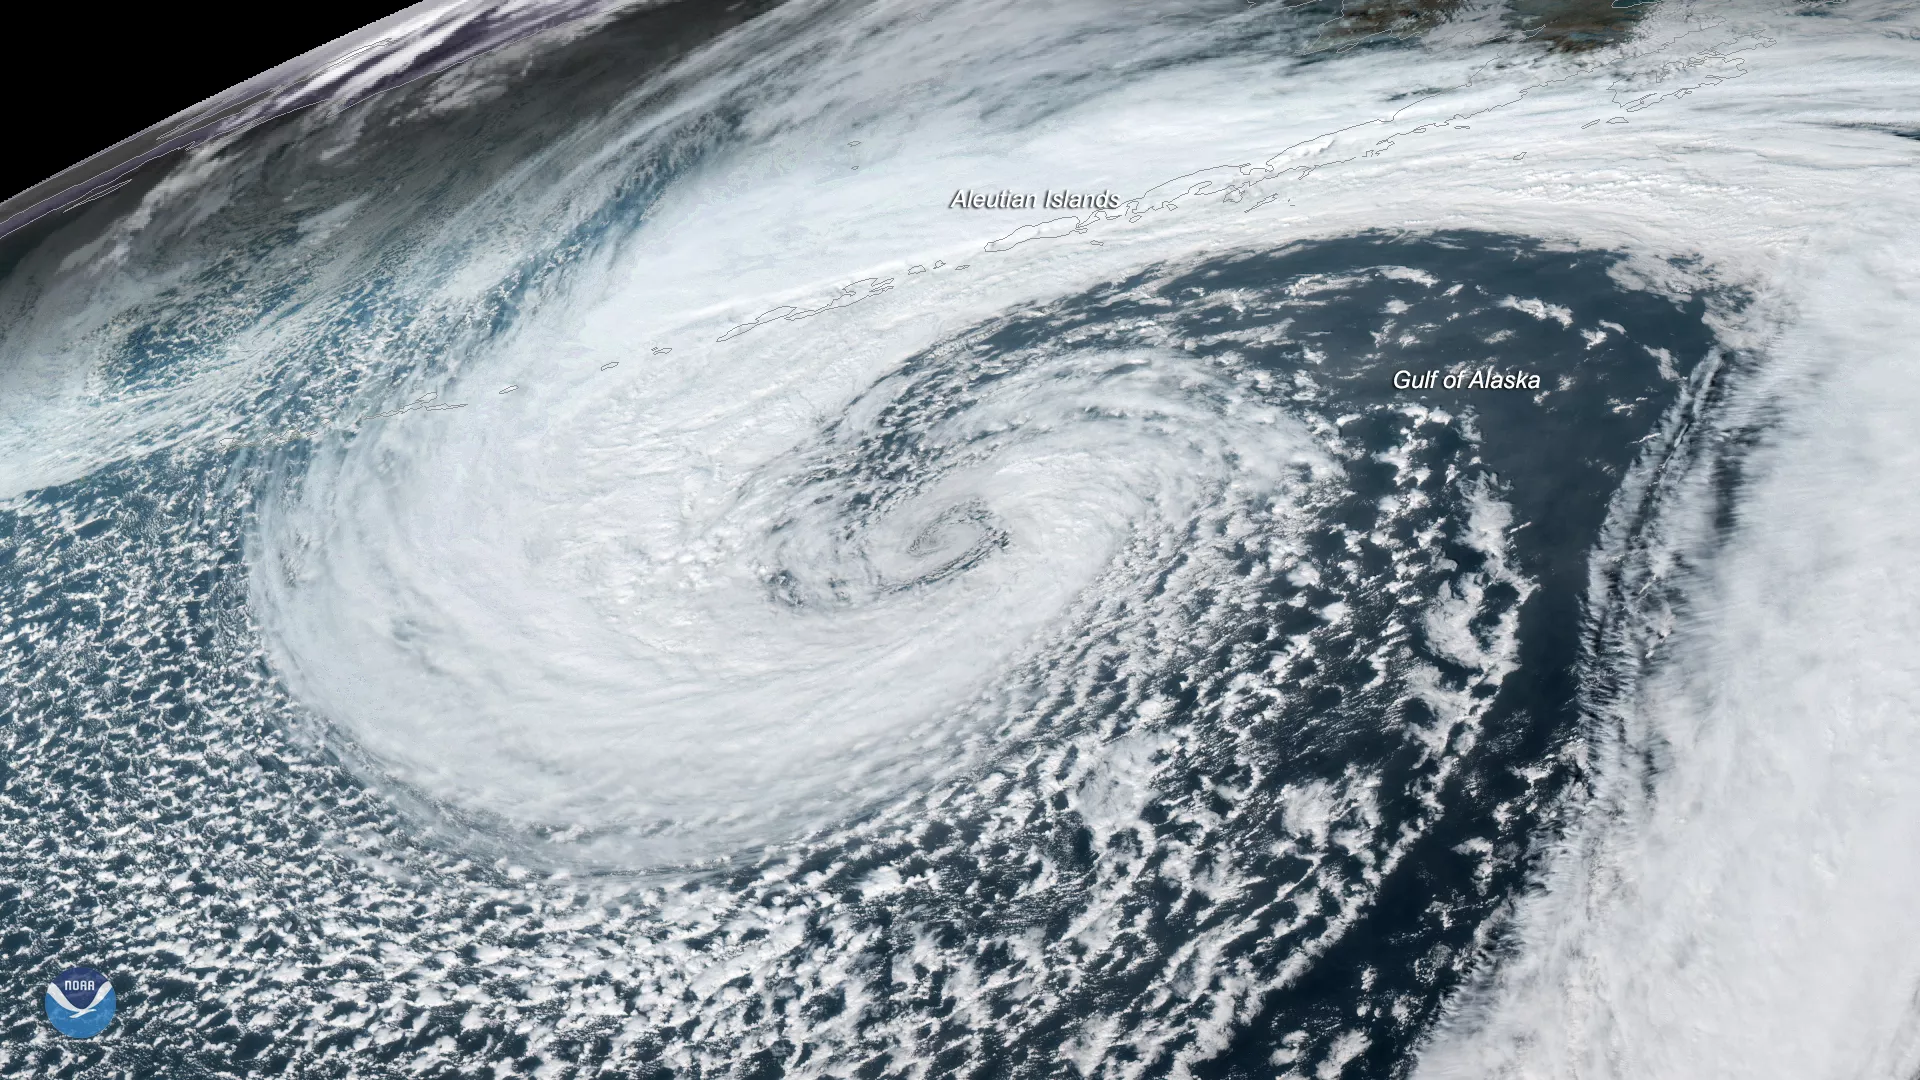 Large, white, swirling low pressure system cloud that looks like a reverse comma over the Gulf of Alaska and Aleutian Islands. 